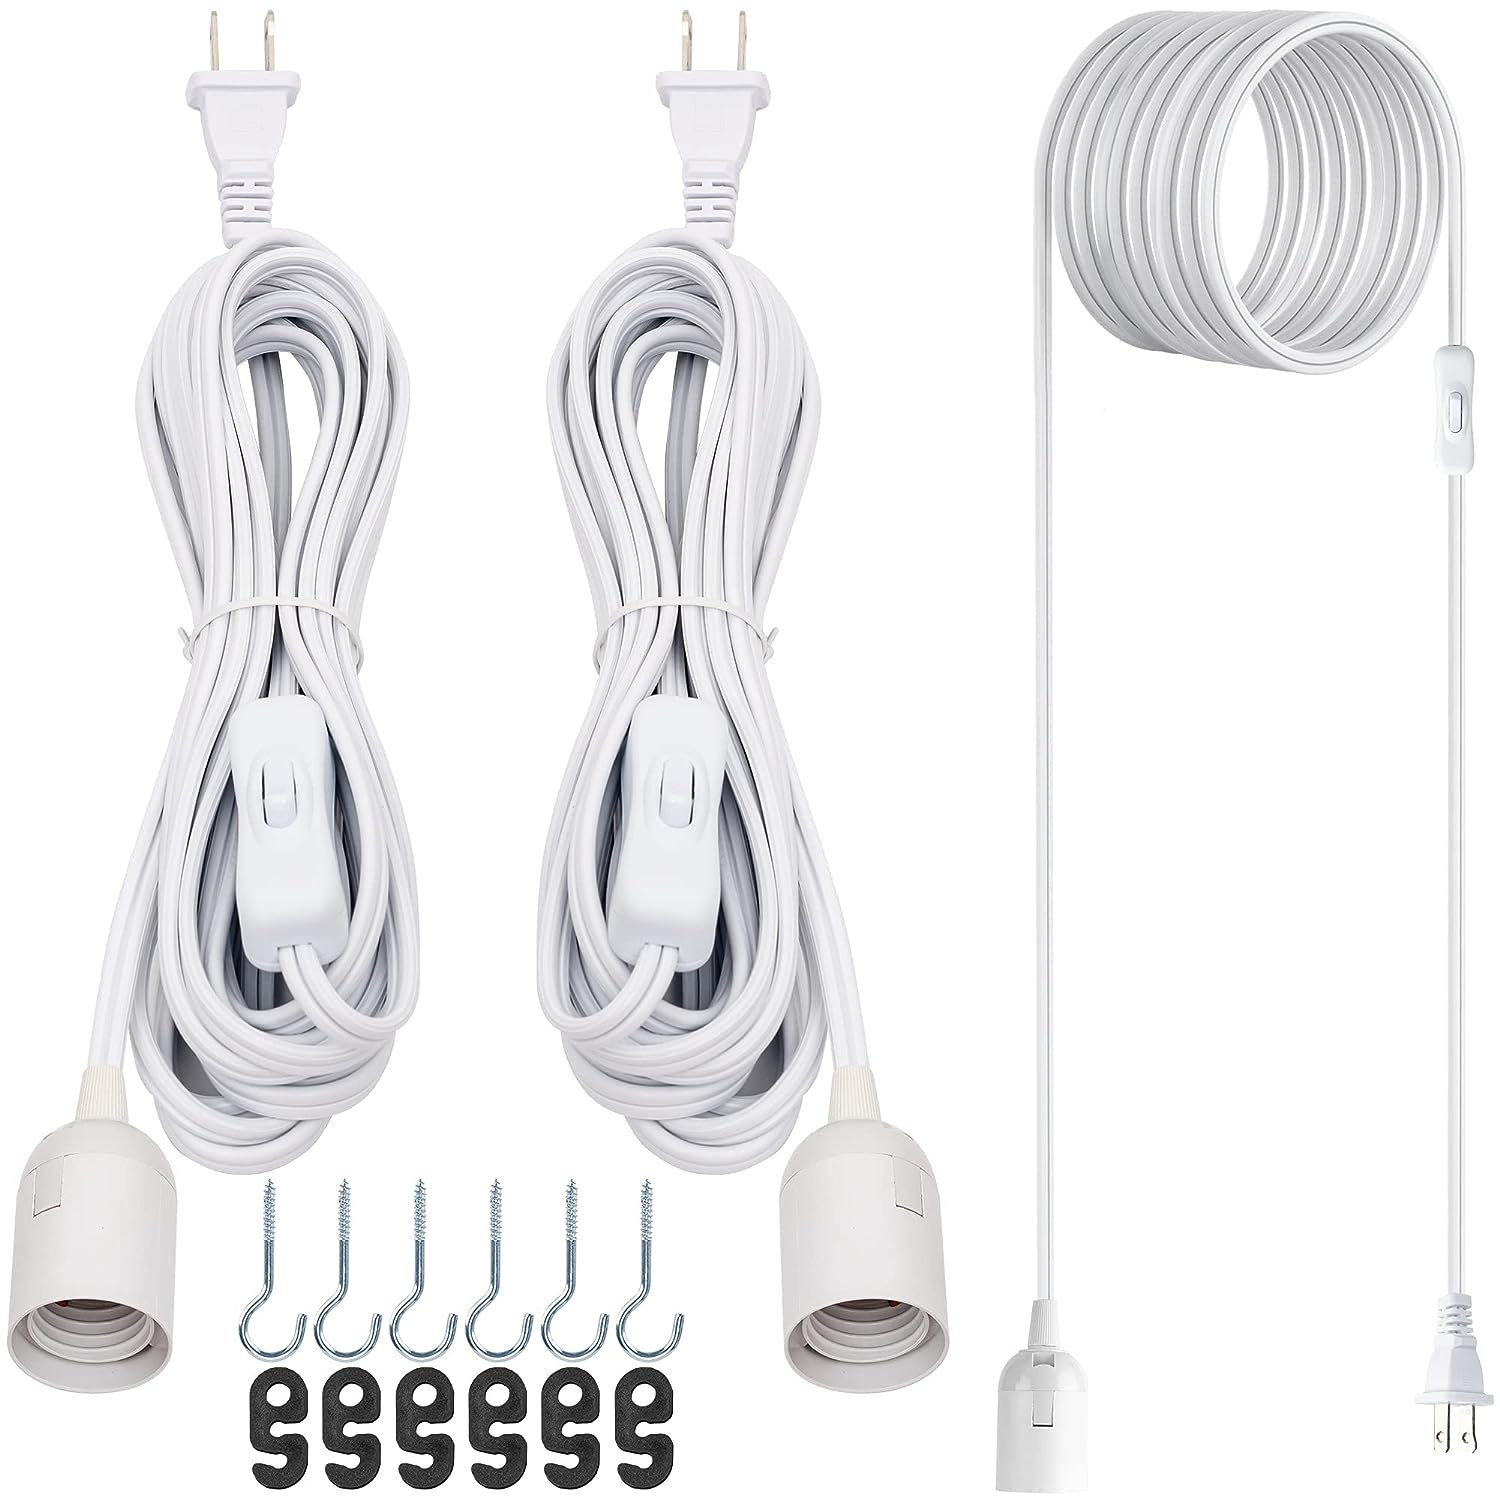 JACKYLED Extension Hanging Lantern Cord Cable 20ft UL 360W E26 E27 Socket  On/Off Button Pendant